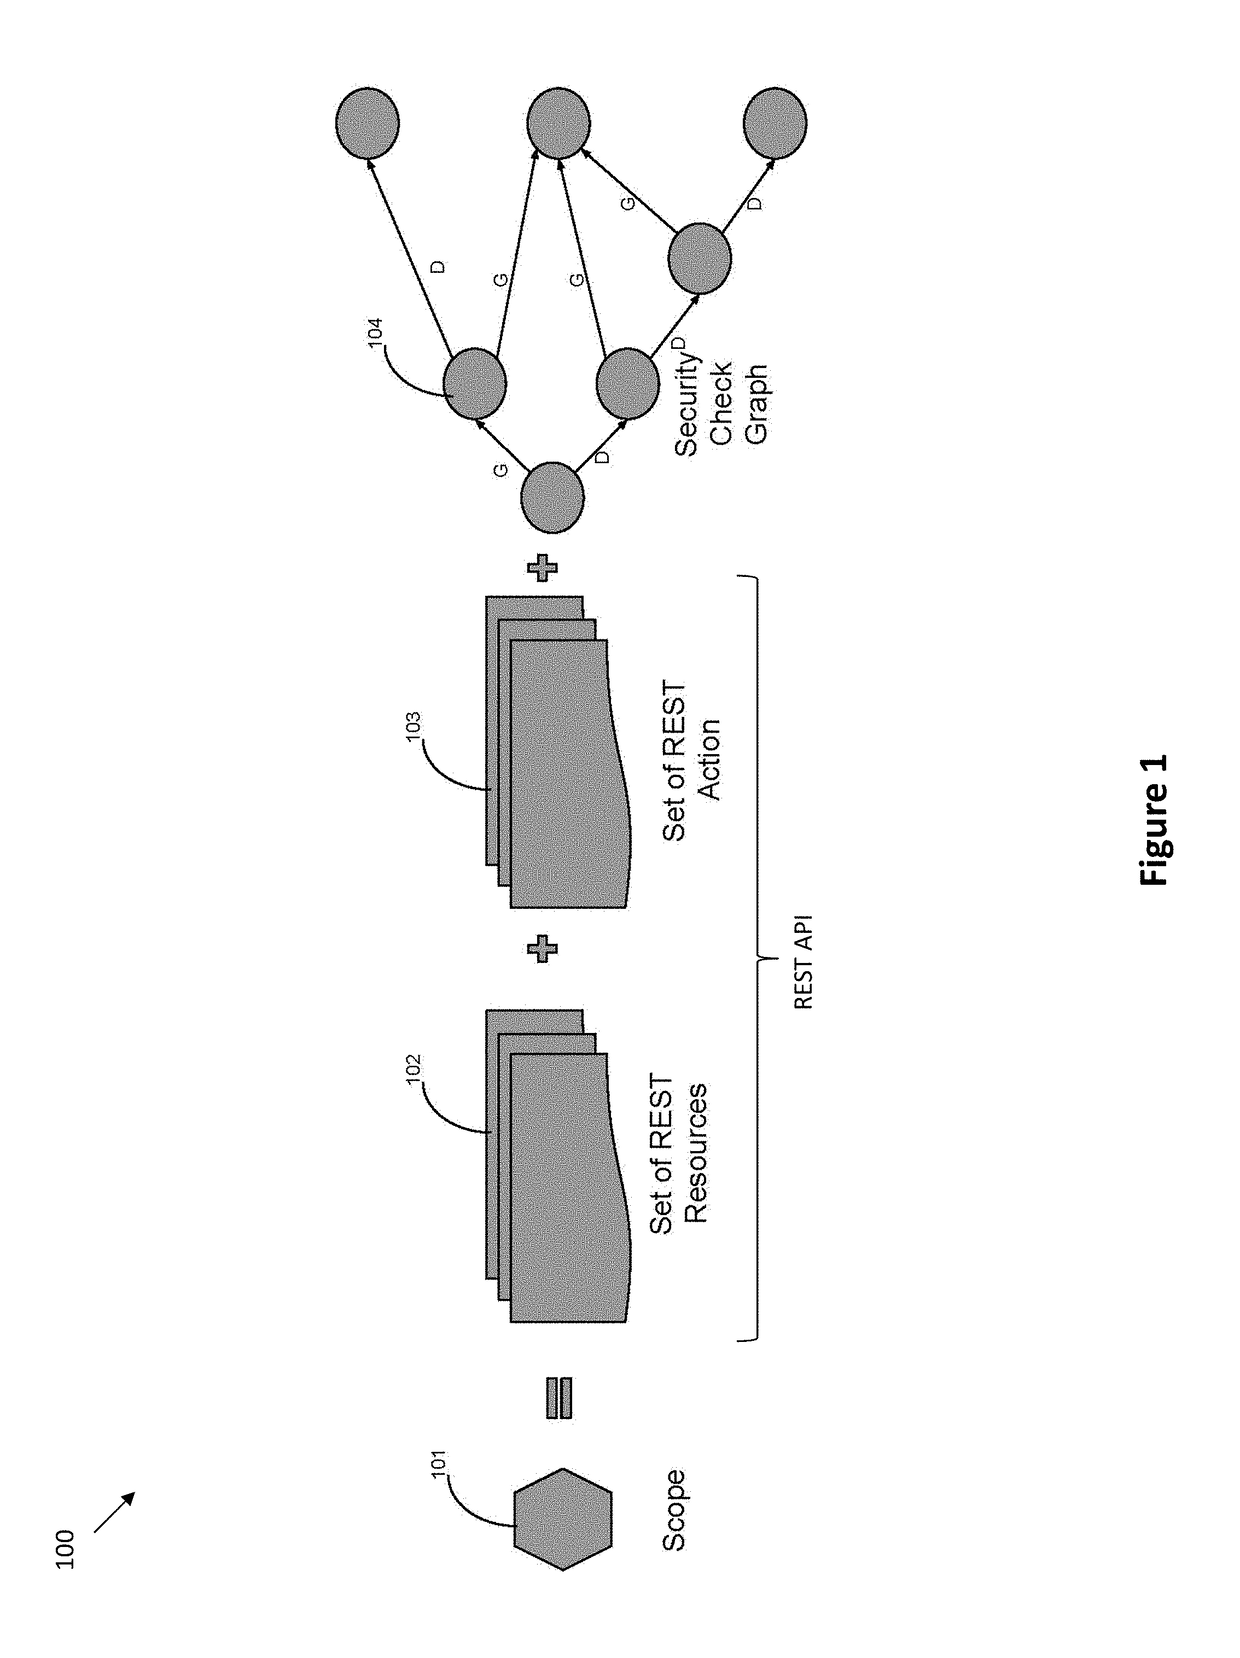 Systems and methods for scope-based access